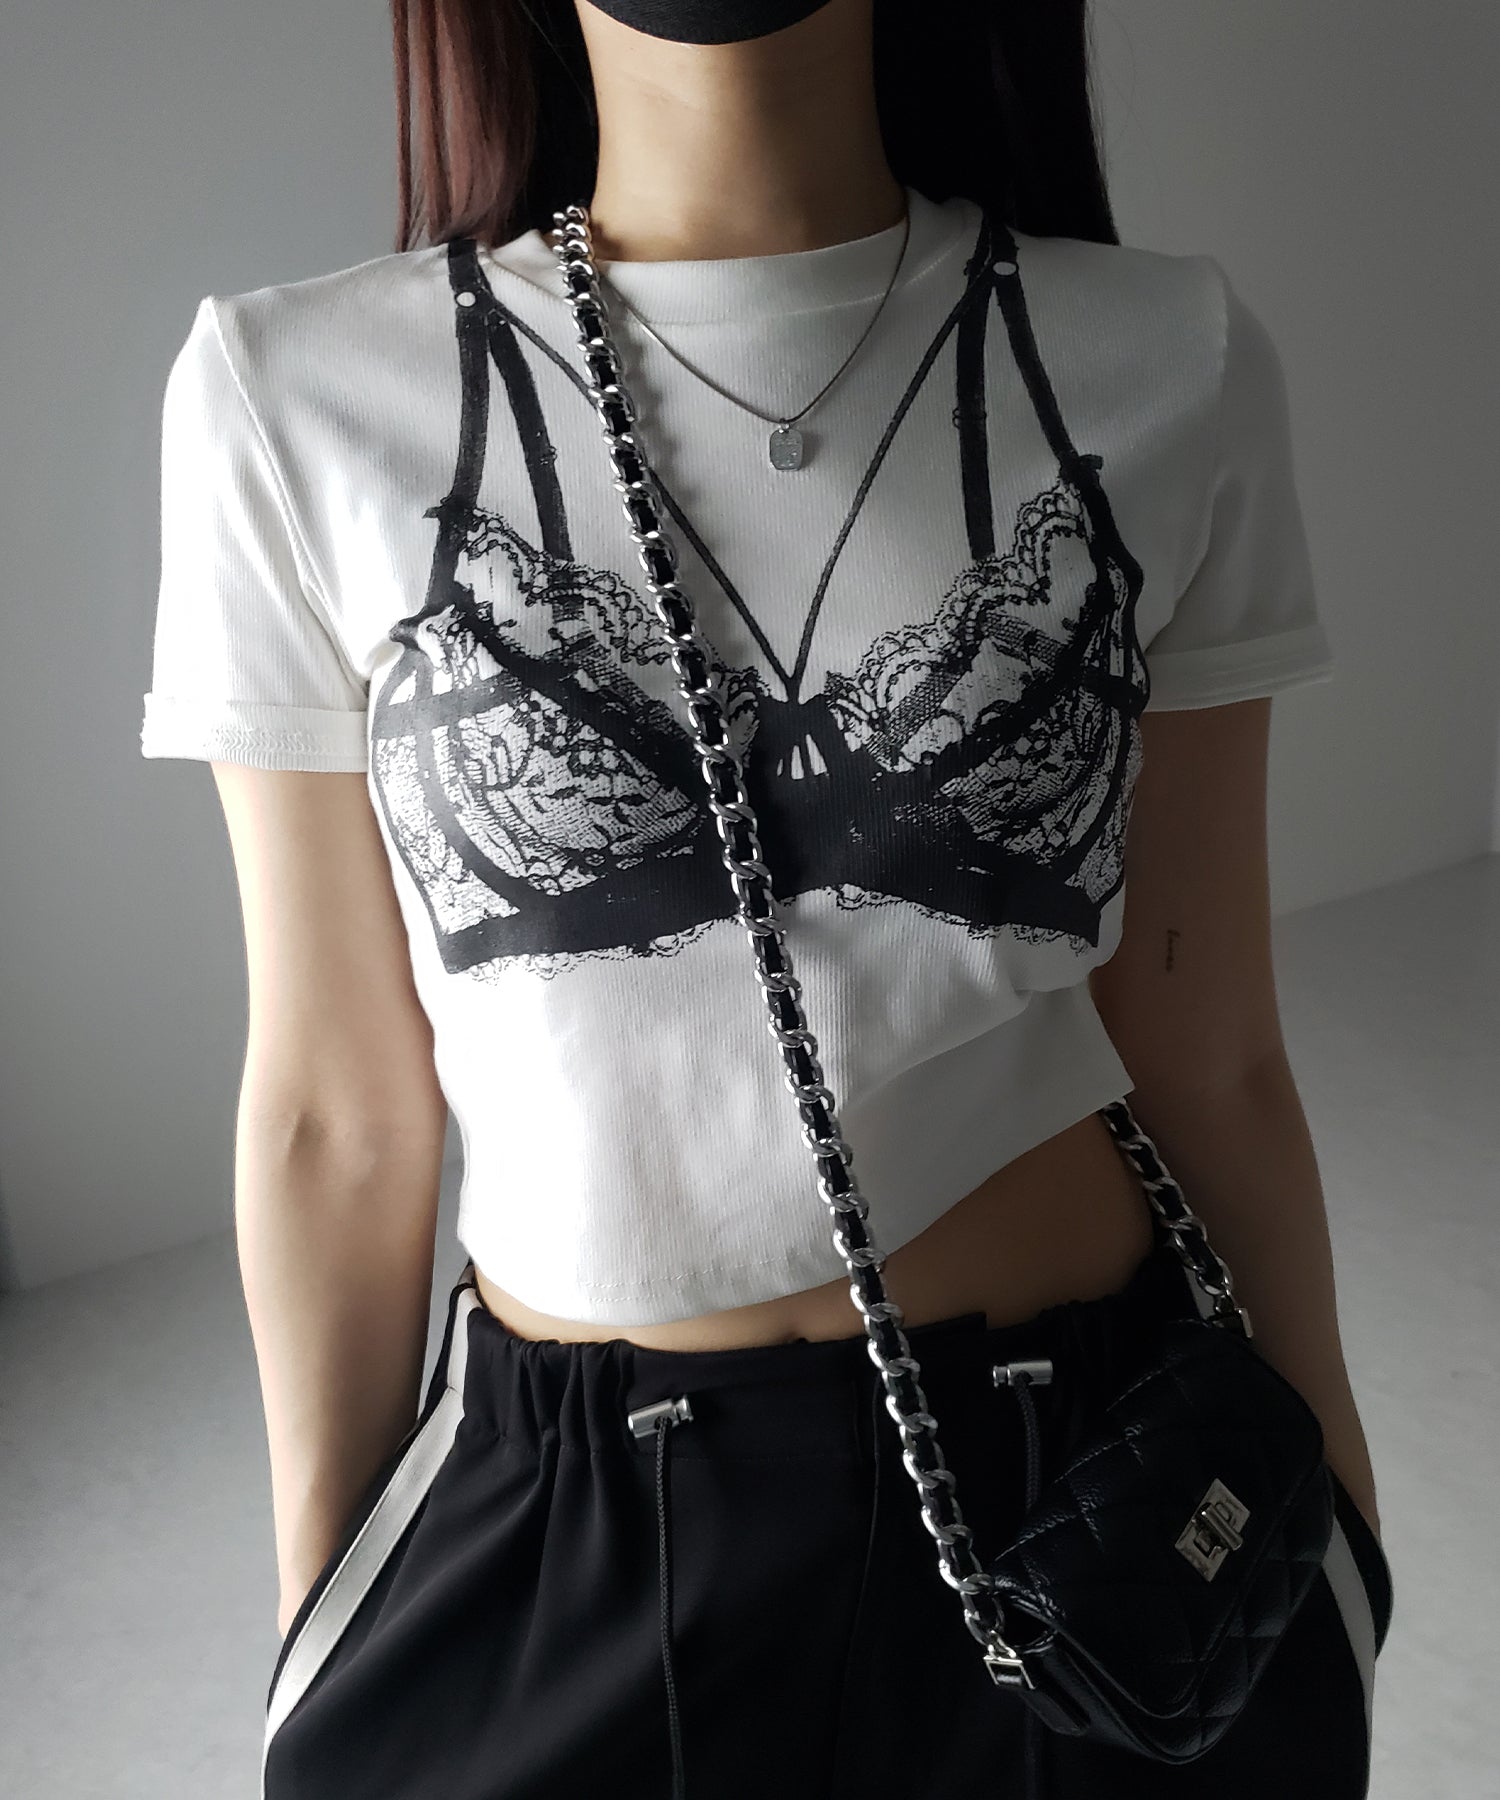 【 ３color 】レースランジェリー半袖クロップドＴ ／ lace lingerie short sleeve cropped T